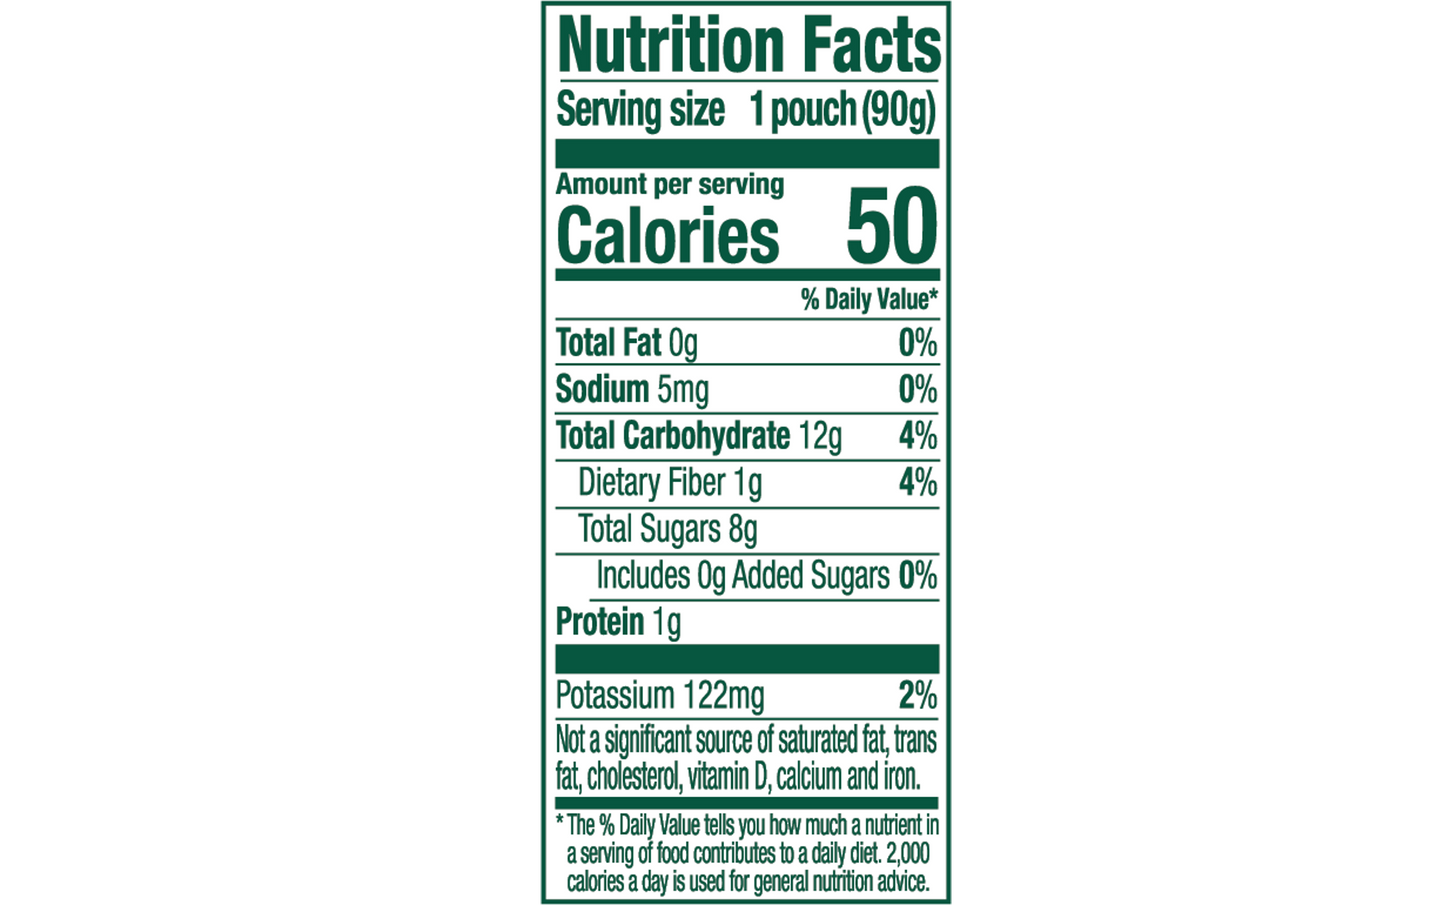 Nutrition facts for Buddy Fruits Blueberry, Sweet Potato & Apple fruit & veggies pouch.